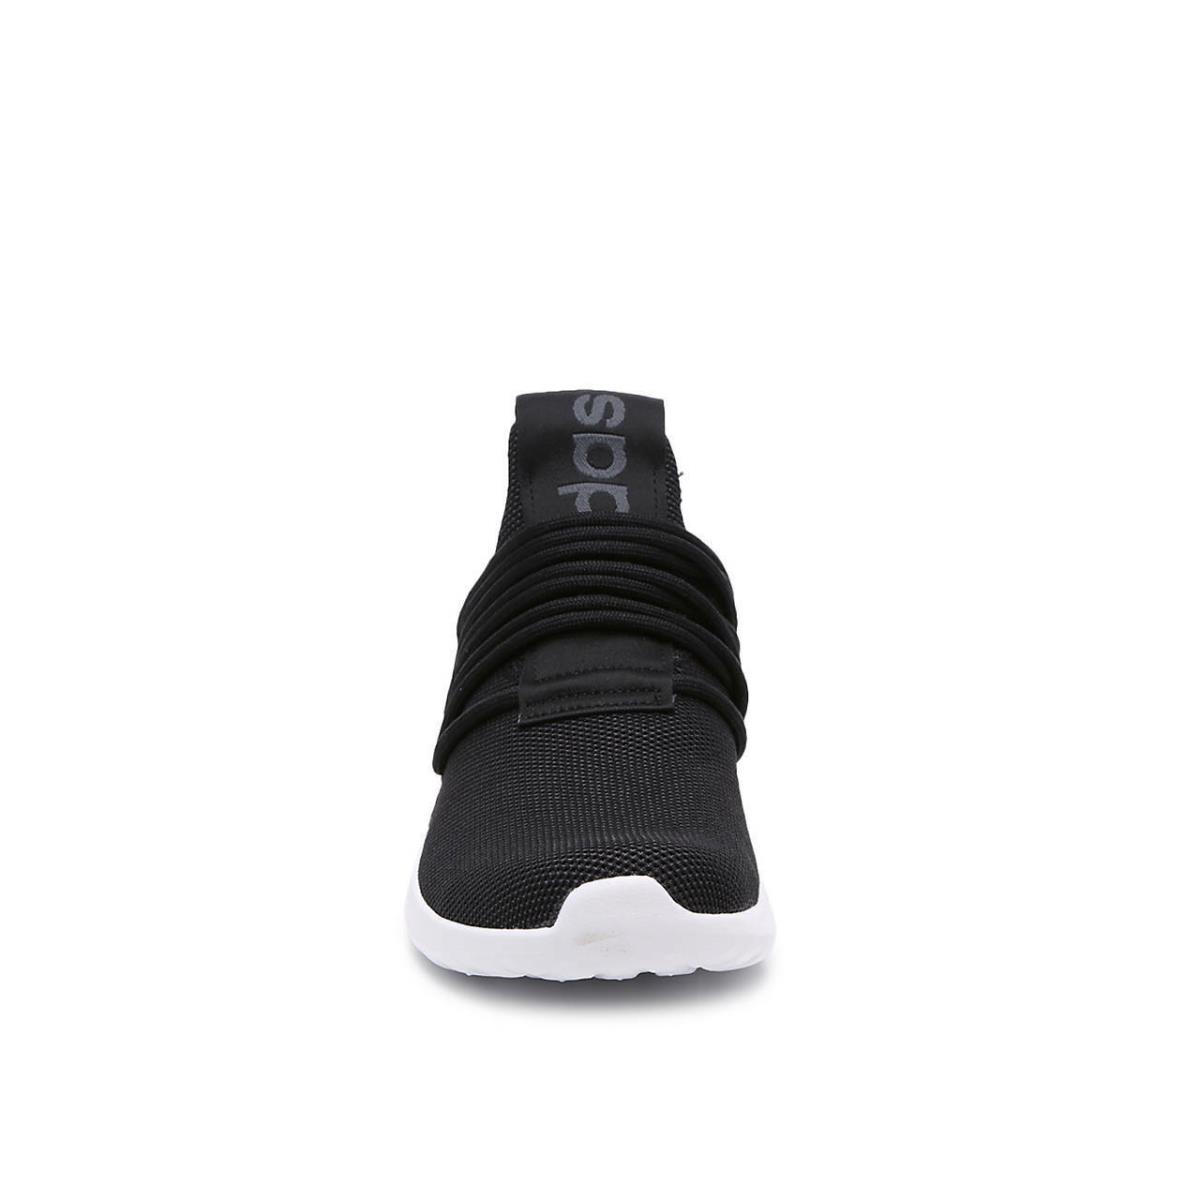 Adidas shoes LITE RACER ADAPT 3